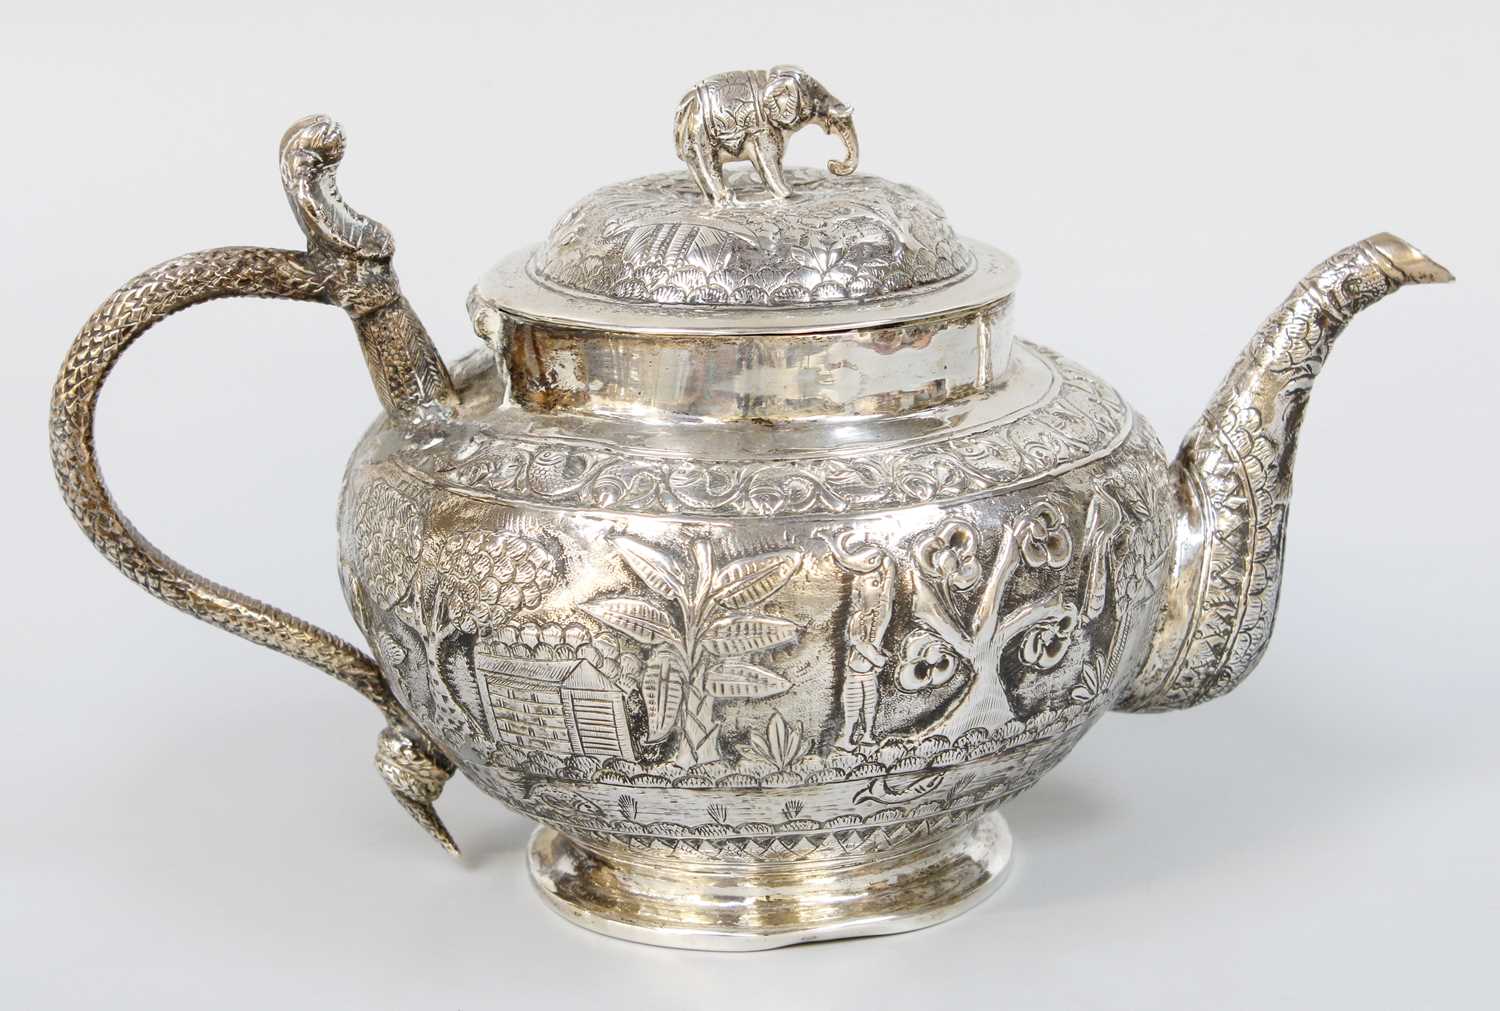 Lot 36 - An Indian or Burnese Silver Teapot, The Base...